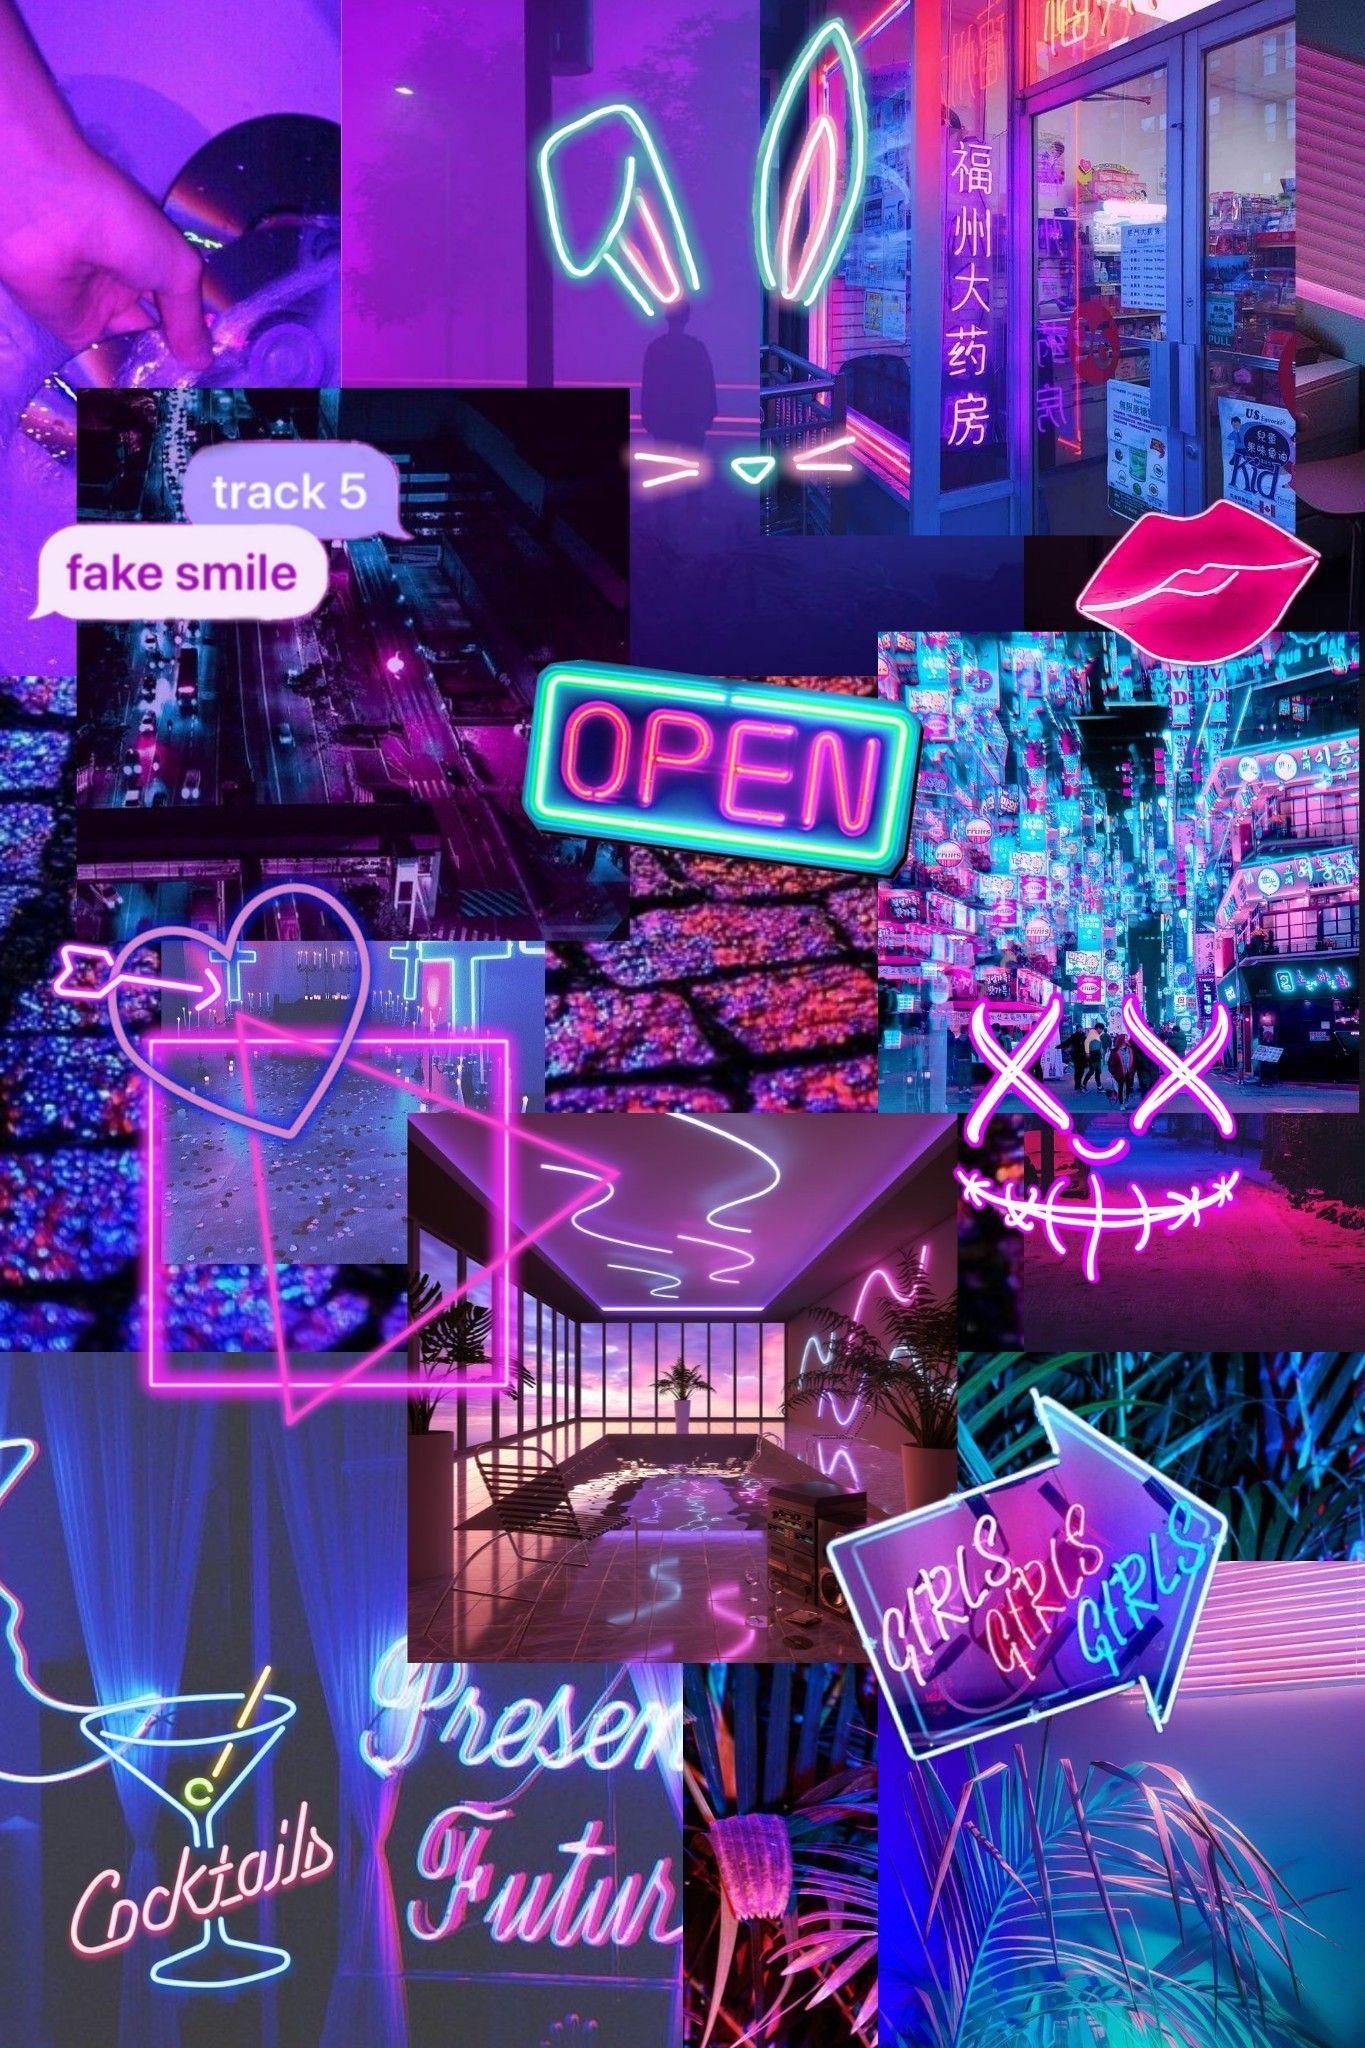 Aesthetic phone background with purple and blue neon lights - Neon, collage